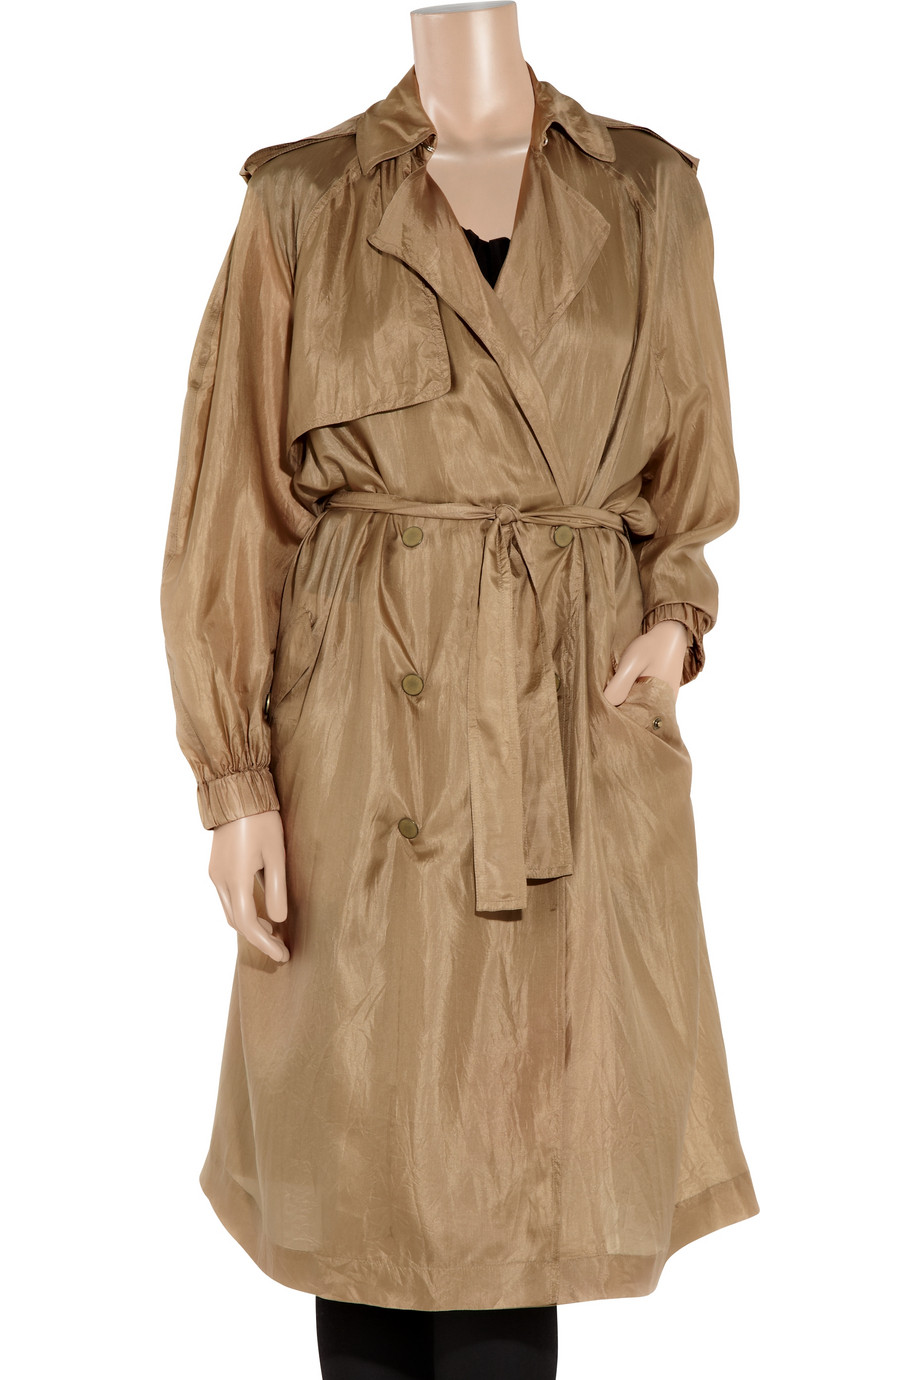 Lanvin Washed Silk-taffeta Trench Coat in Brown (Natural) - Lyst